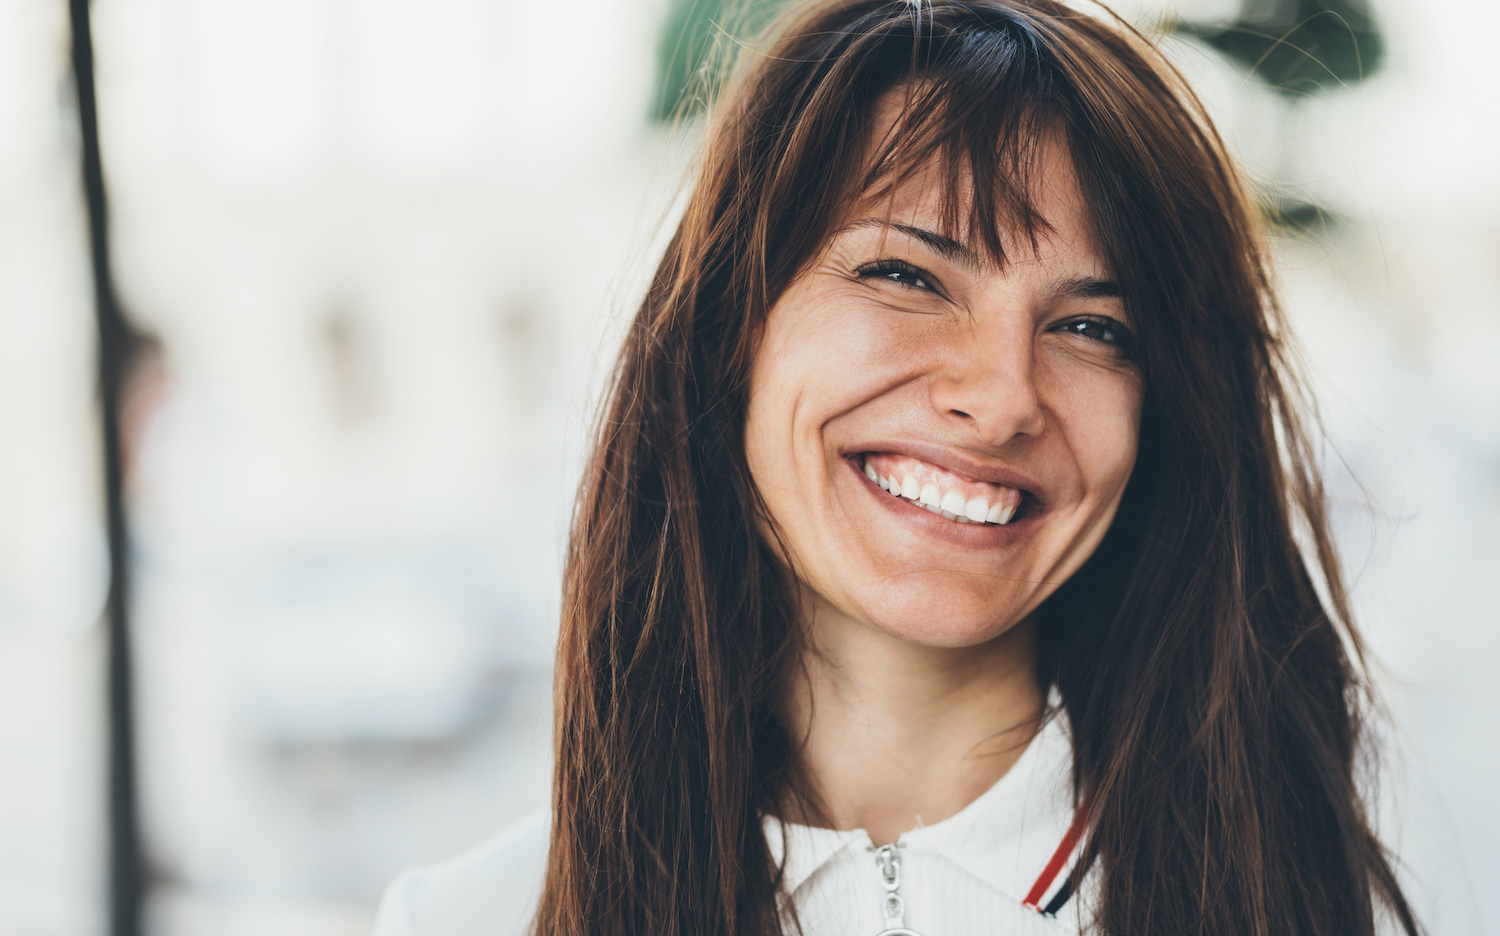 Brunette woman with a gummy smile